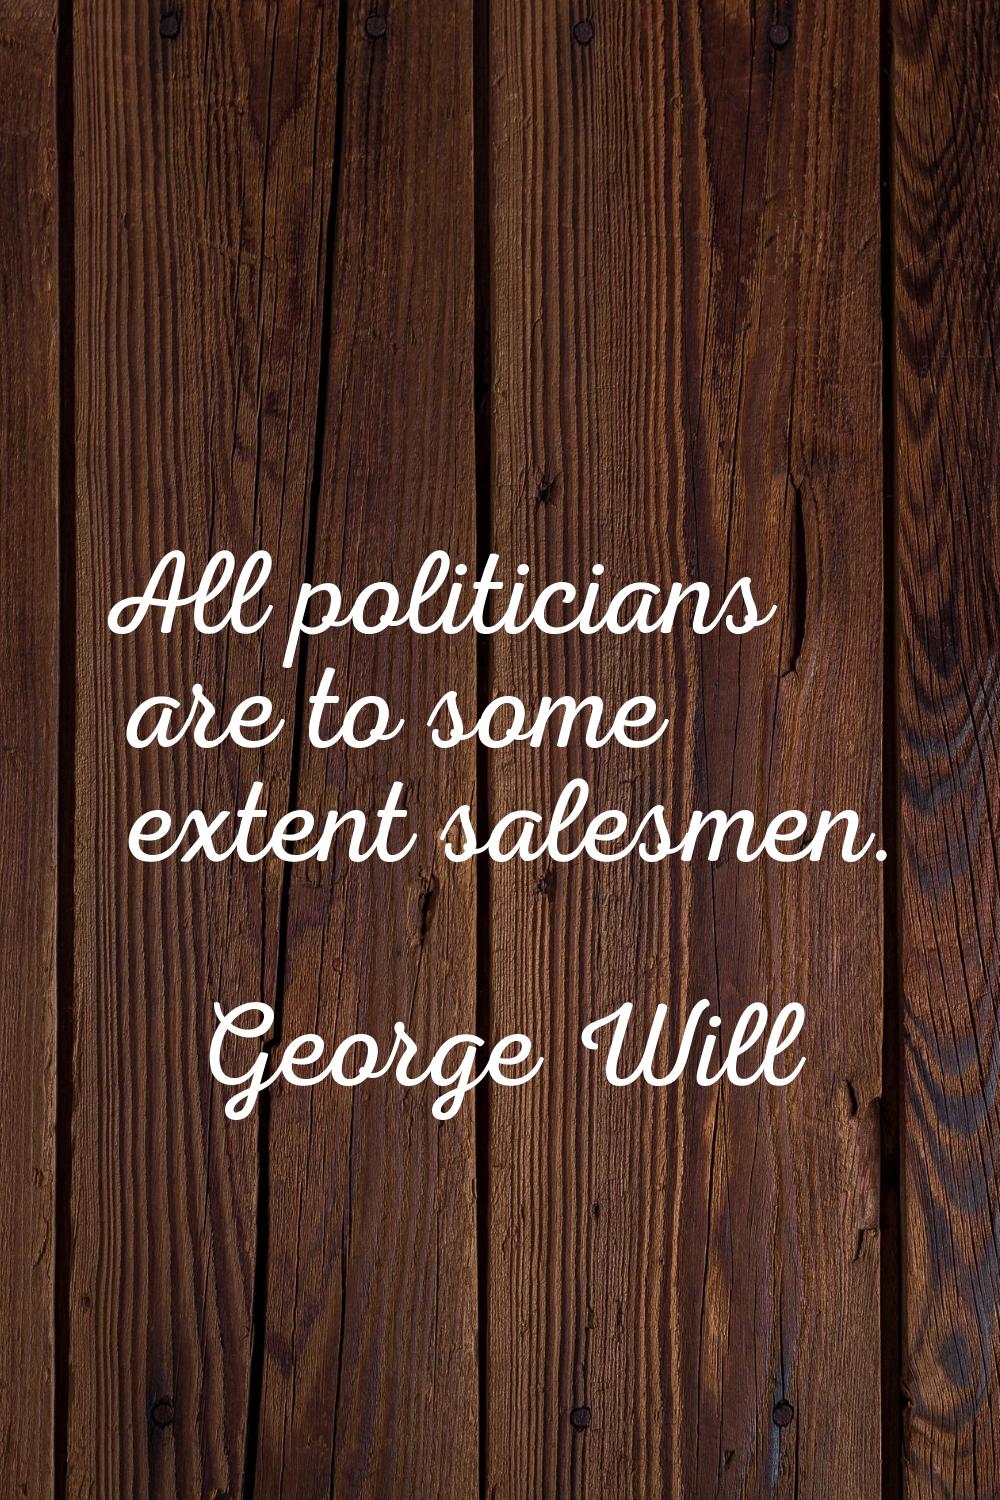 All politicians are to some extent salesmen.